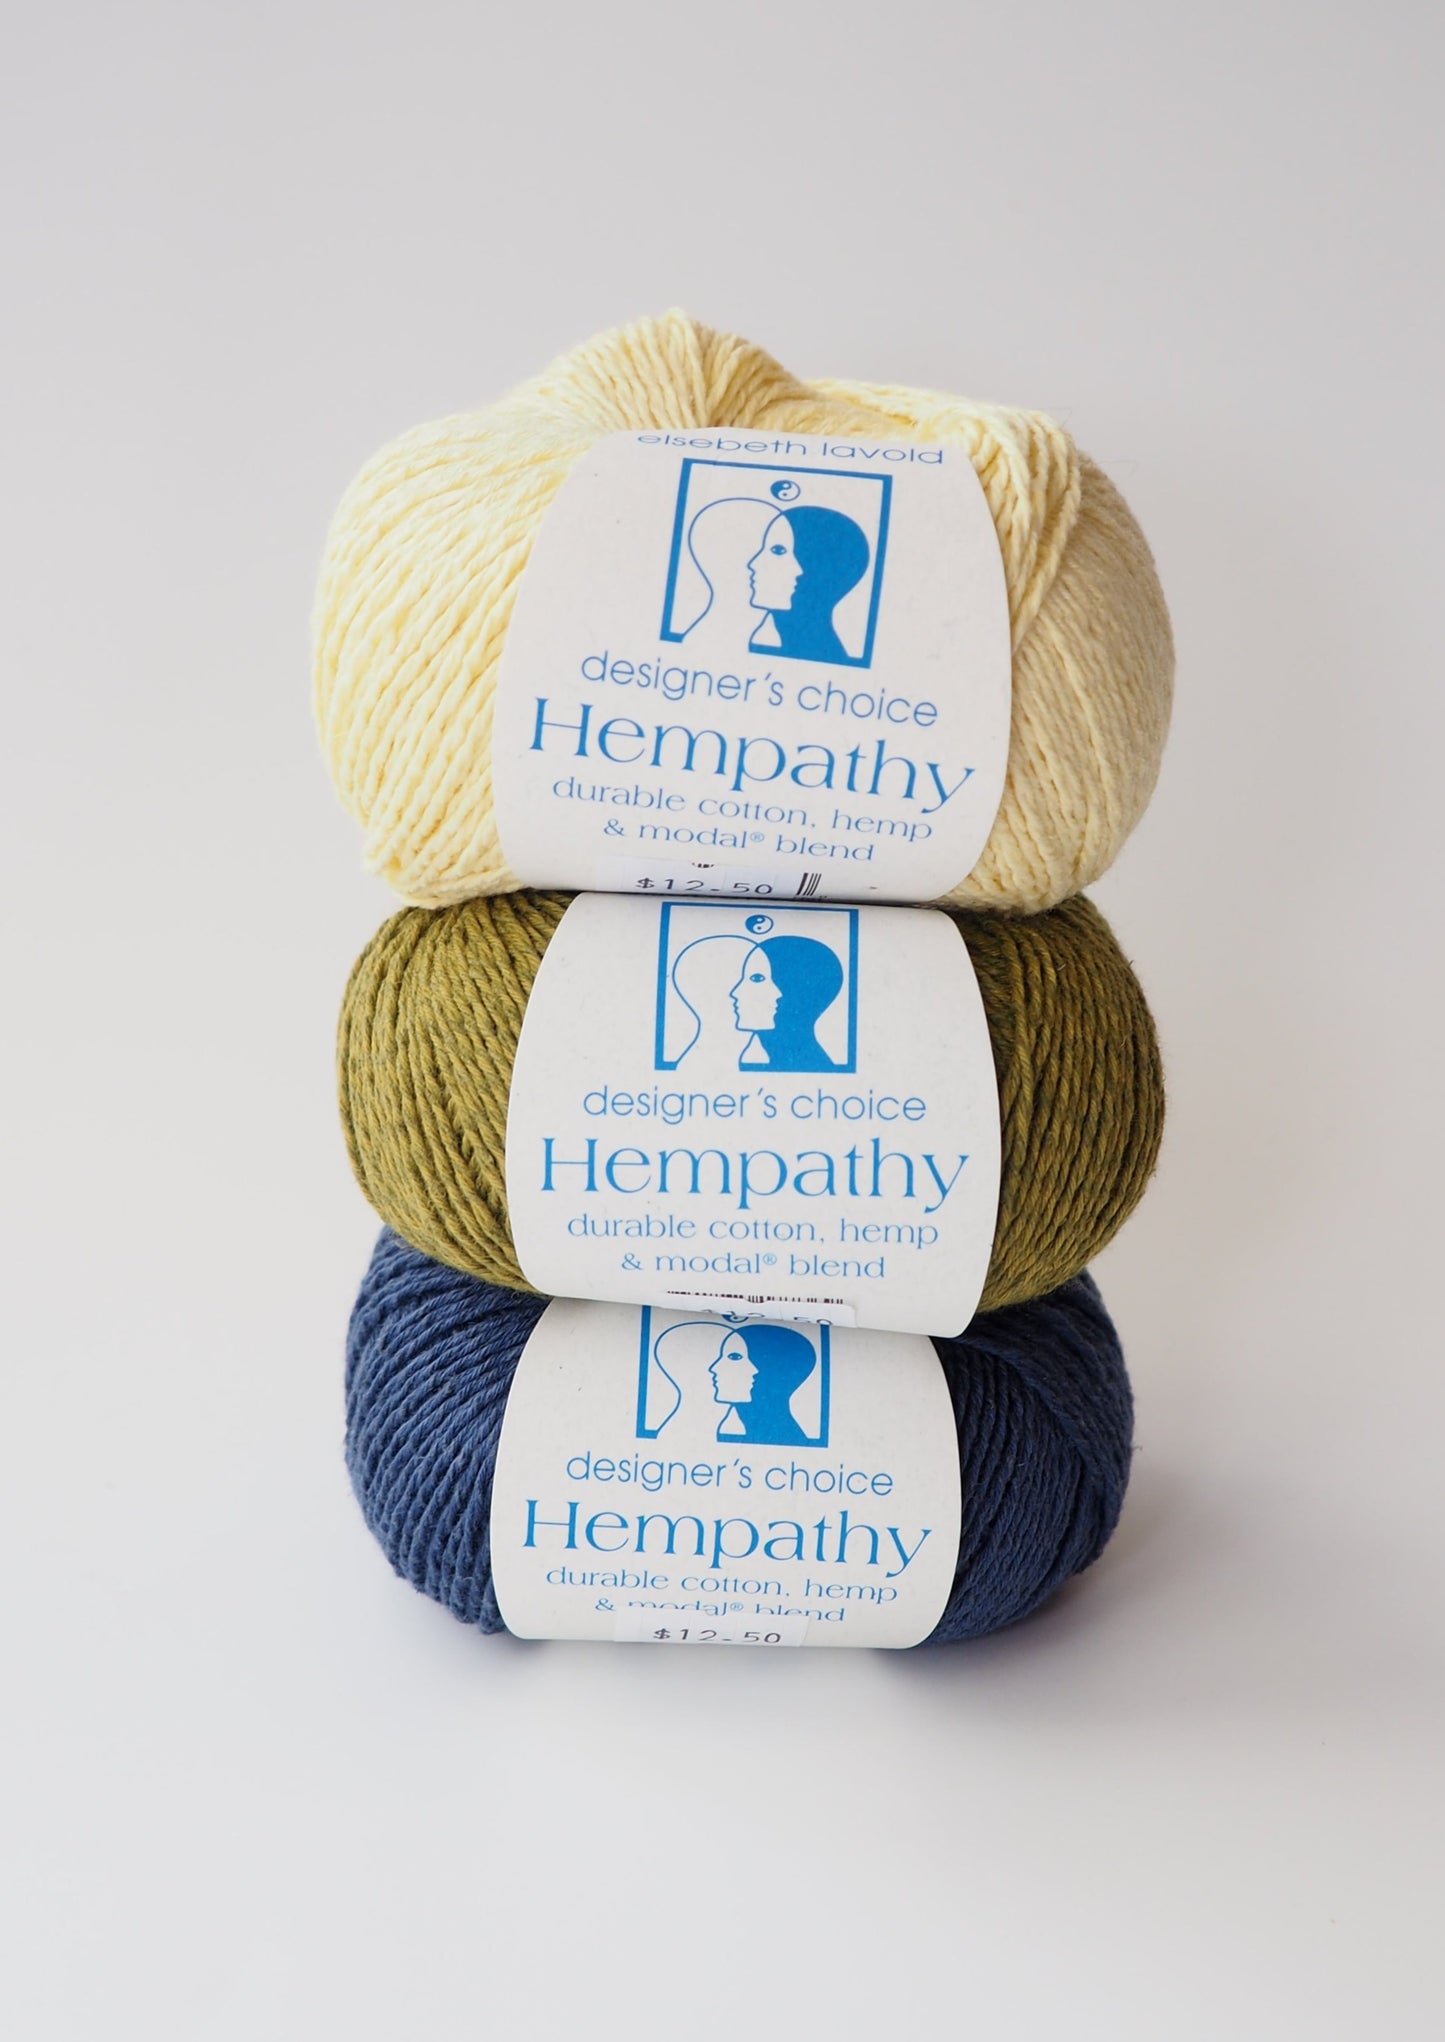 Image showcasing the Elsebeth Lavold Hempathy yarn. This sport weight blend of 41% Cotton, 34% Hemp, and 25% Modal is perfect for summer projects. Enjoy the lightweight and breathable nature of Hempathy, ideal for creating stylish garments and accessories.